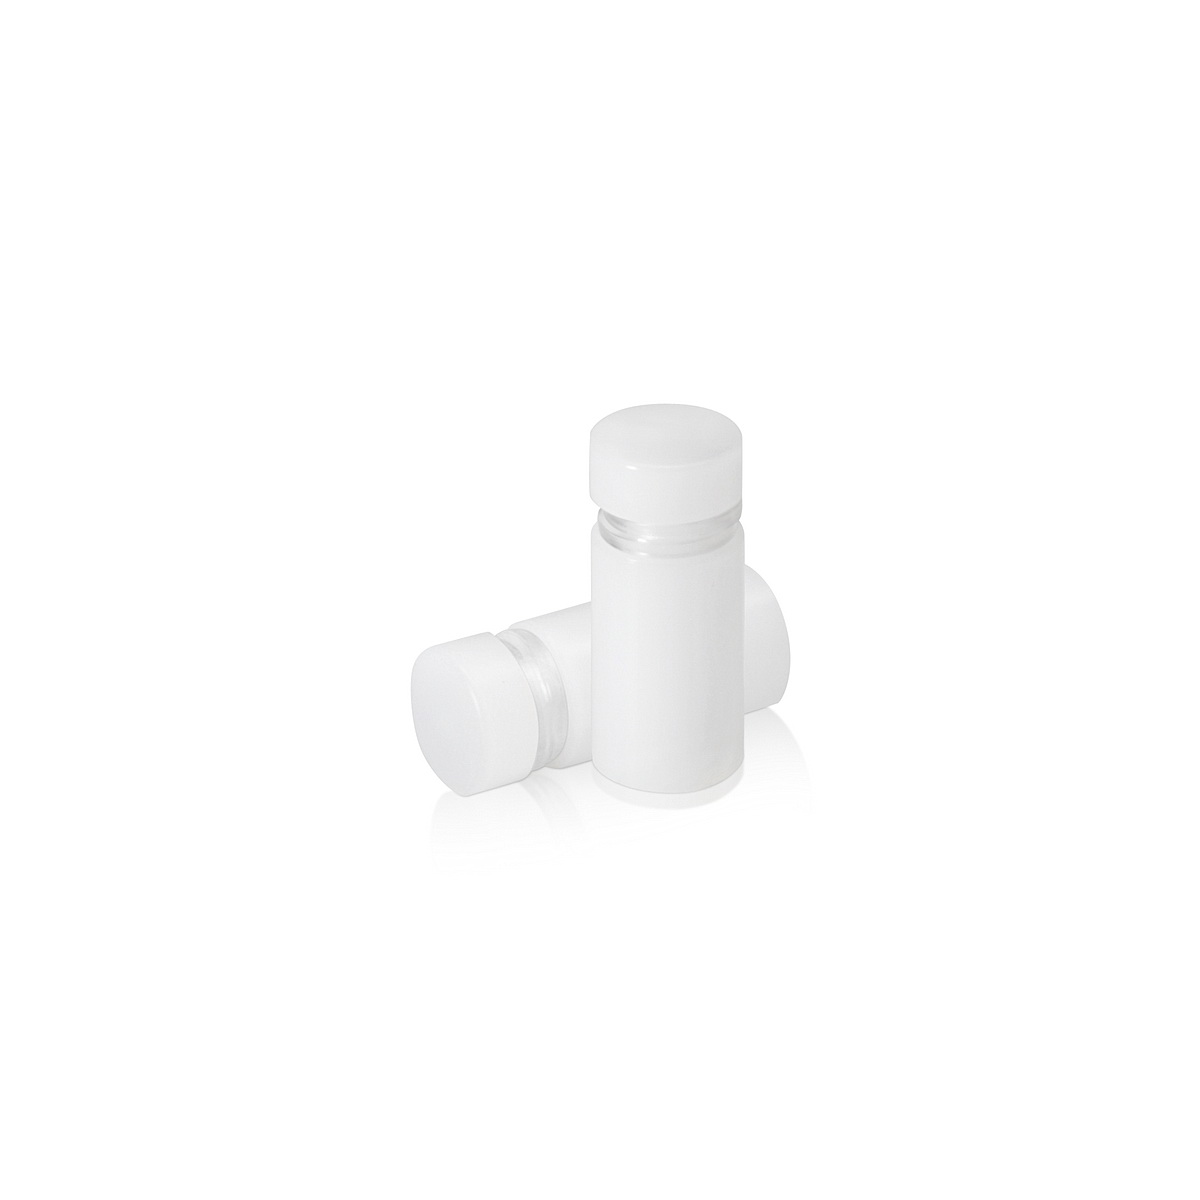 5/8'' Diameter X 3/4'' Barrel Length, White  Acrylic Standoff. Easy Fasten Standoff (For Inside Use Only) Tamper Proof [Required Material Hole Size: 3/8'']